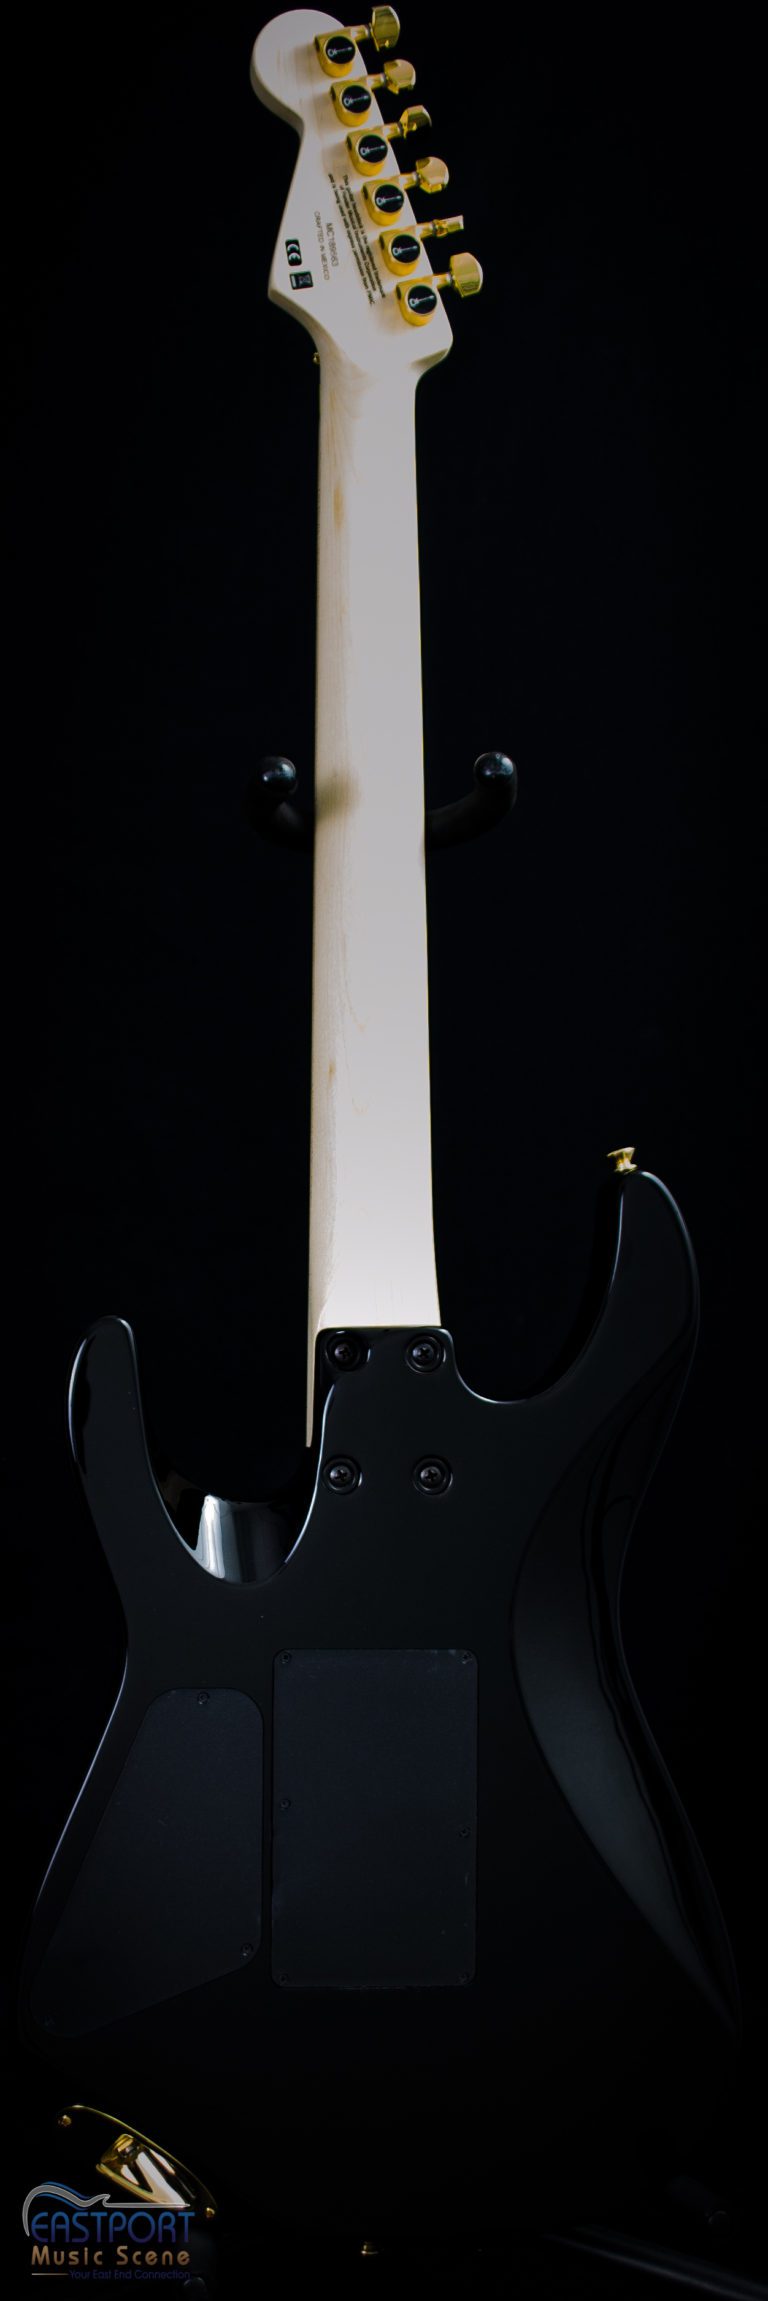 A black electric guitar with white neck and back.